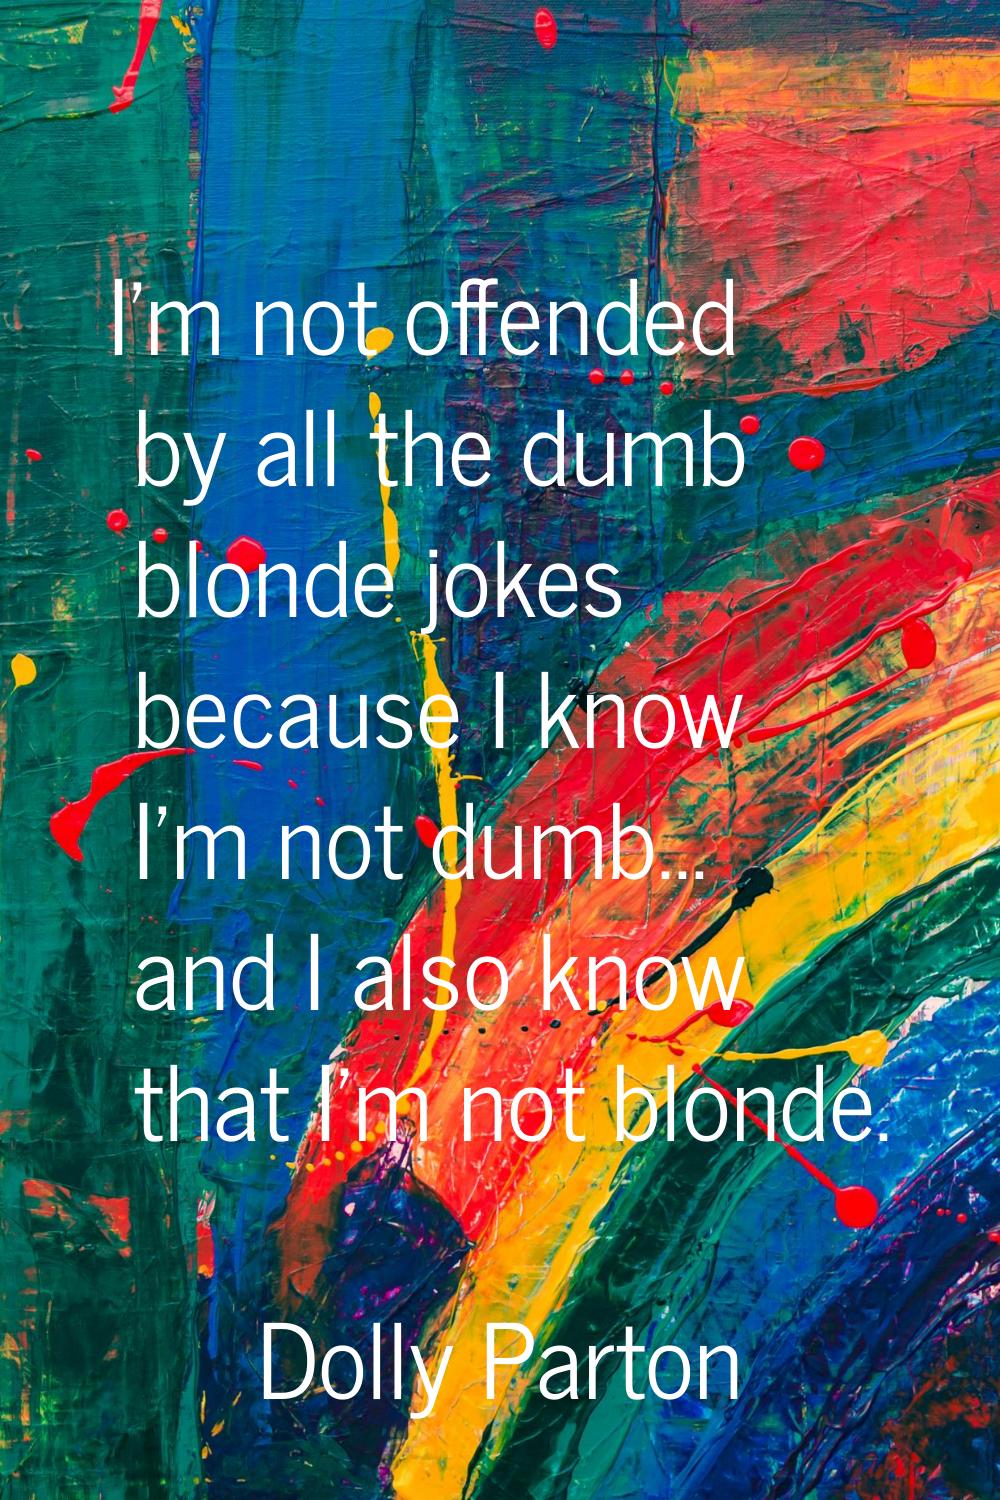 I'm not offended by all the dumb blonde jokes because I know I'm not dumb... and I also know that I